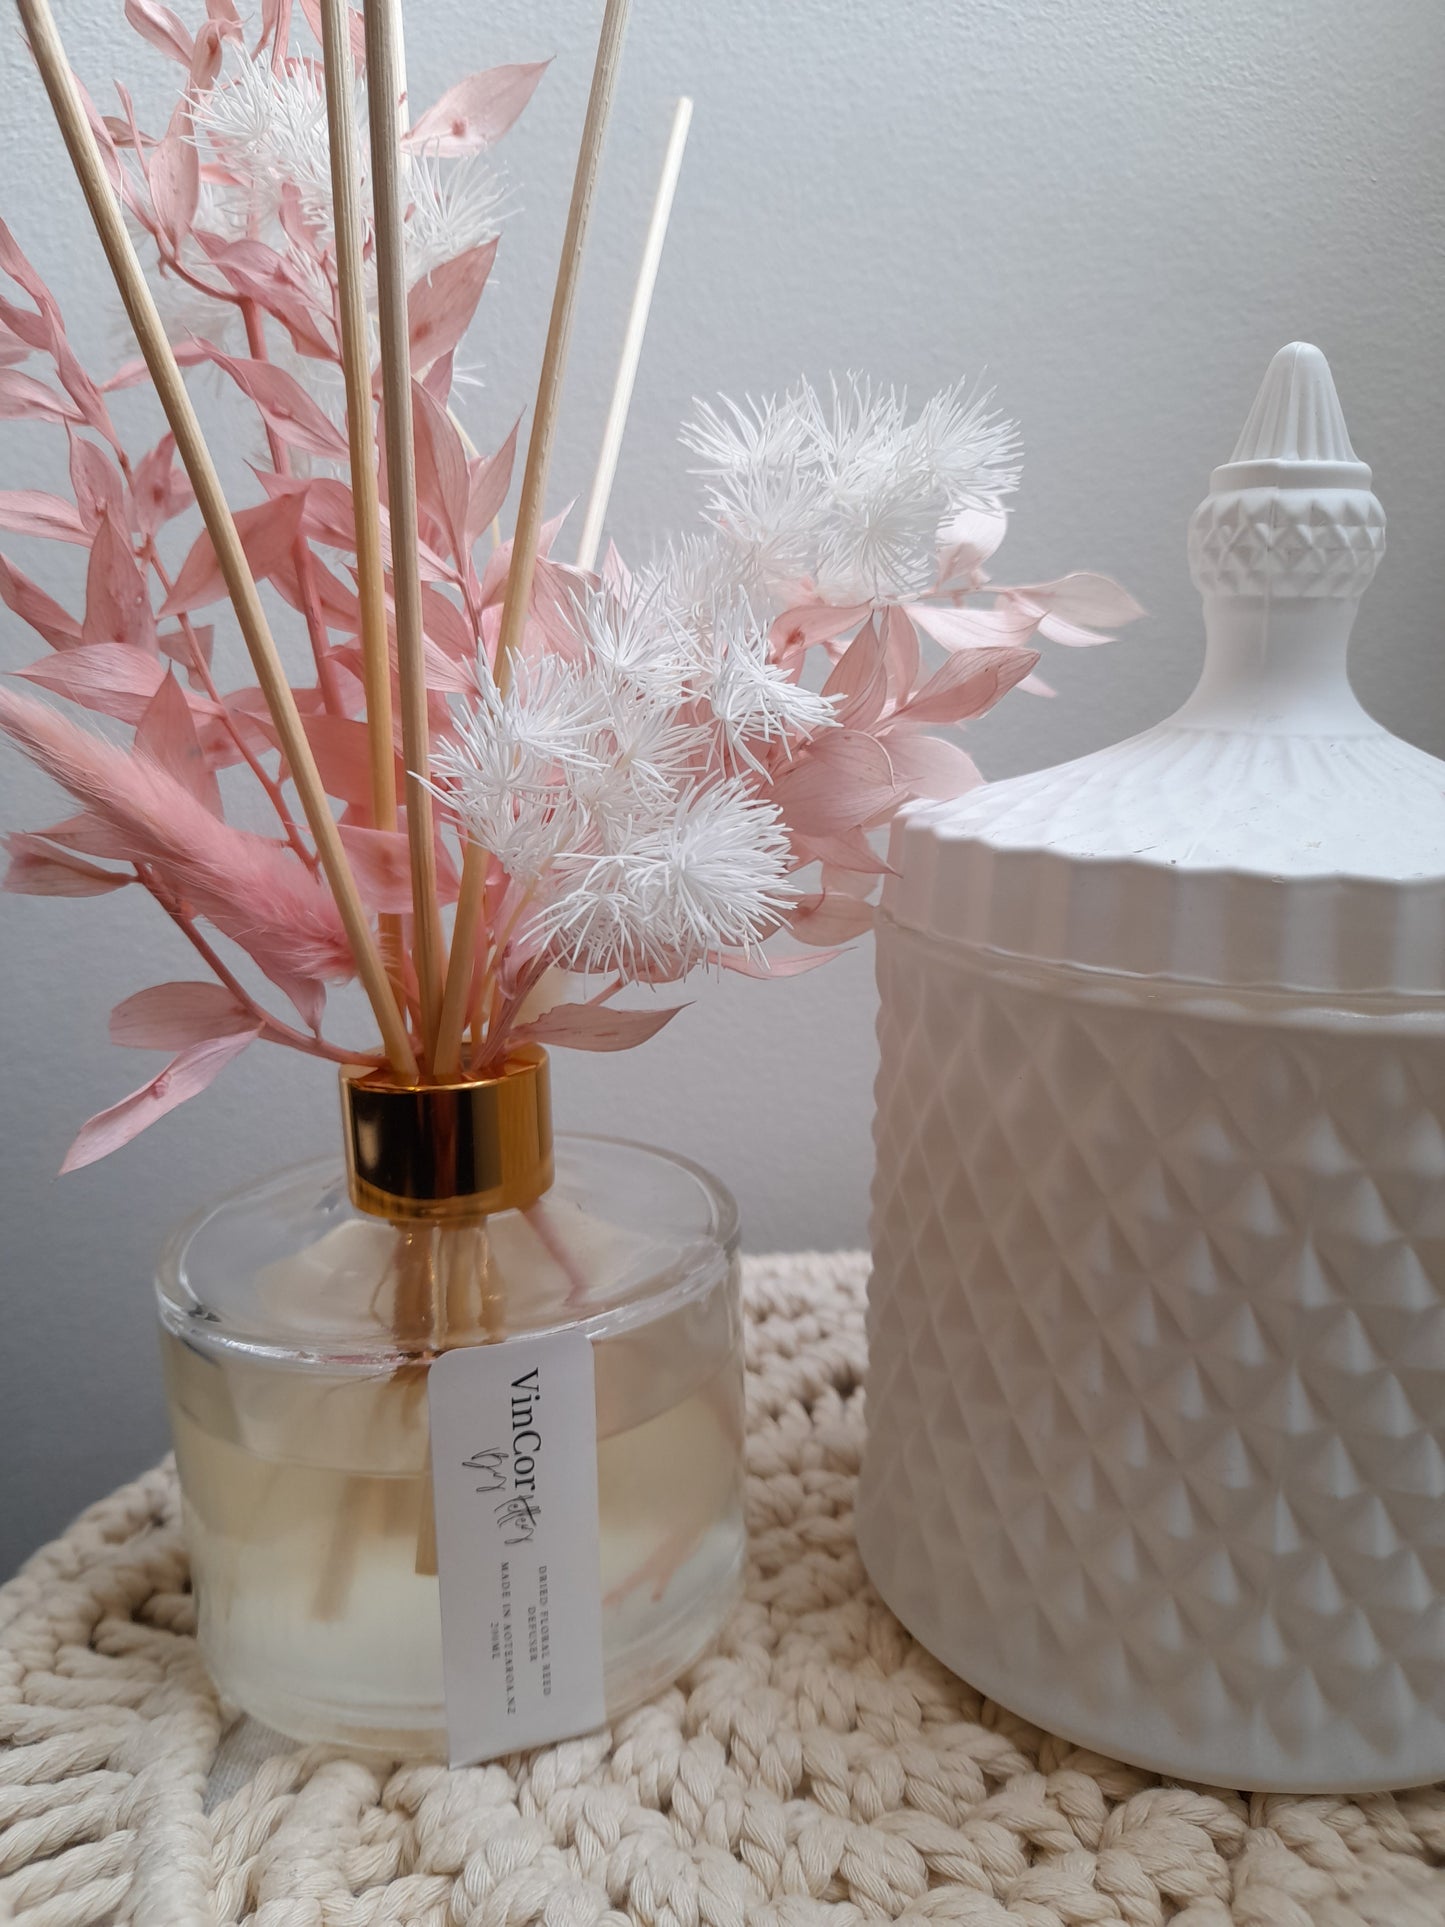 Dried Flower Diffuser- Scent- Peach and Gauva.